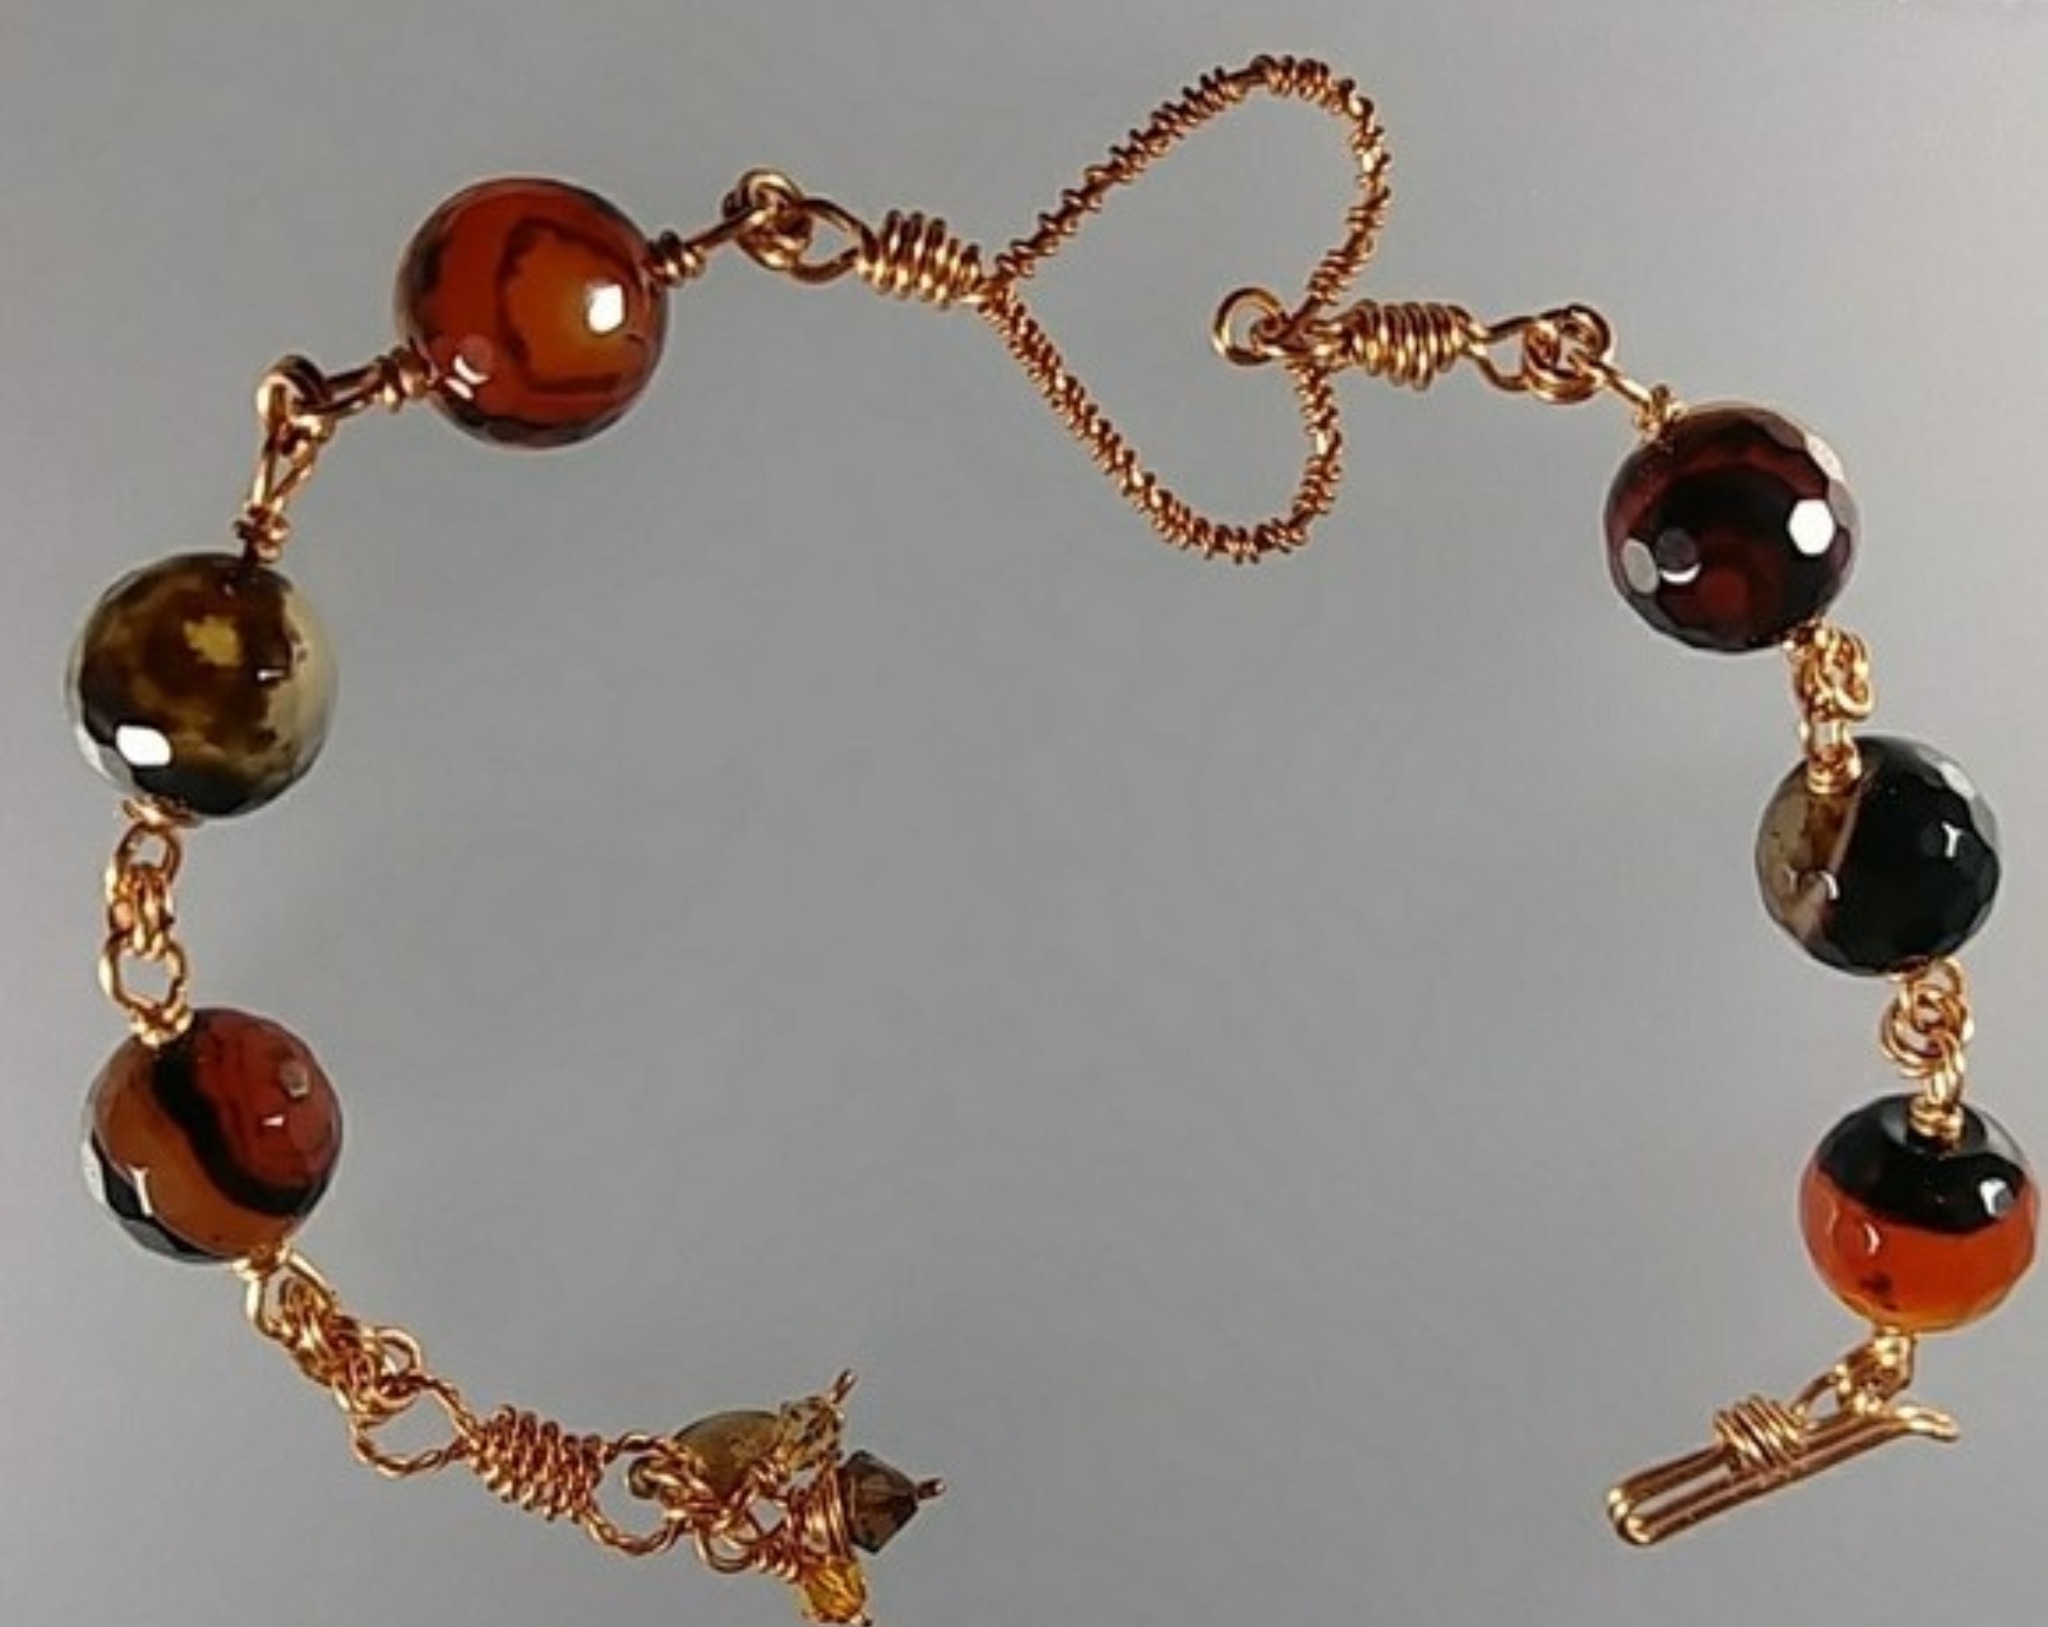 (201-BCT) - Description: Handcrafted Bracelet, Banded Agate Amber Gemstone Beads, Swarovski Crystal, Copper Wire, Handcrafted Chain, Heart and Hook Closure  - Dimension: 8 1/2' L (Inches)